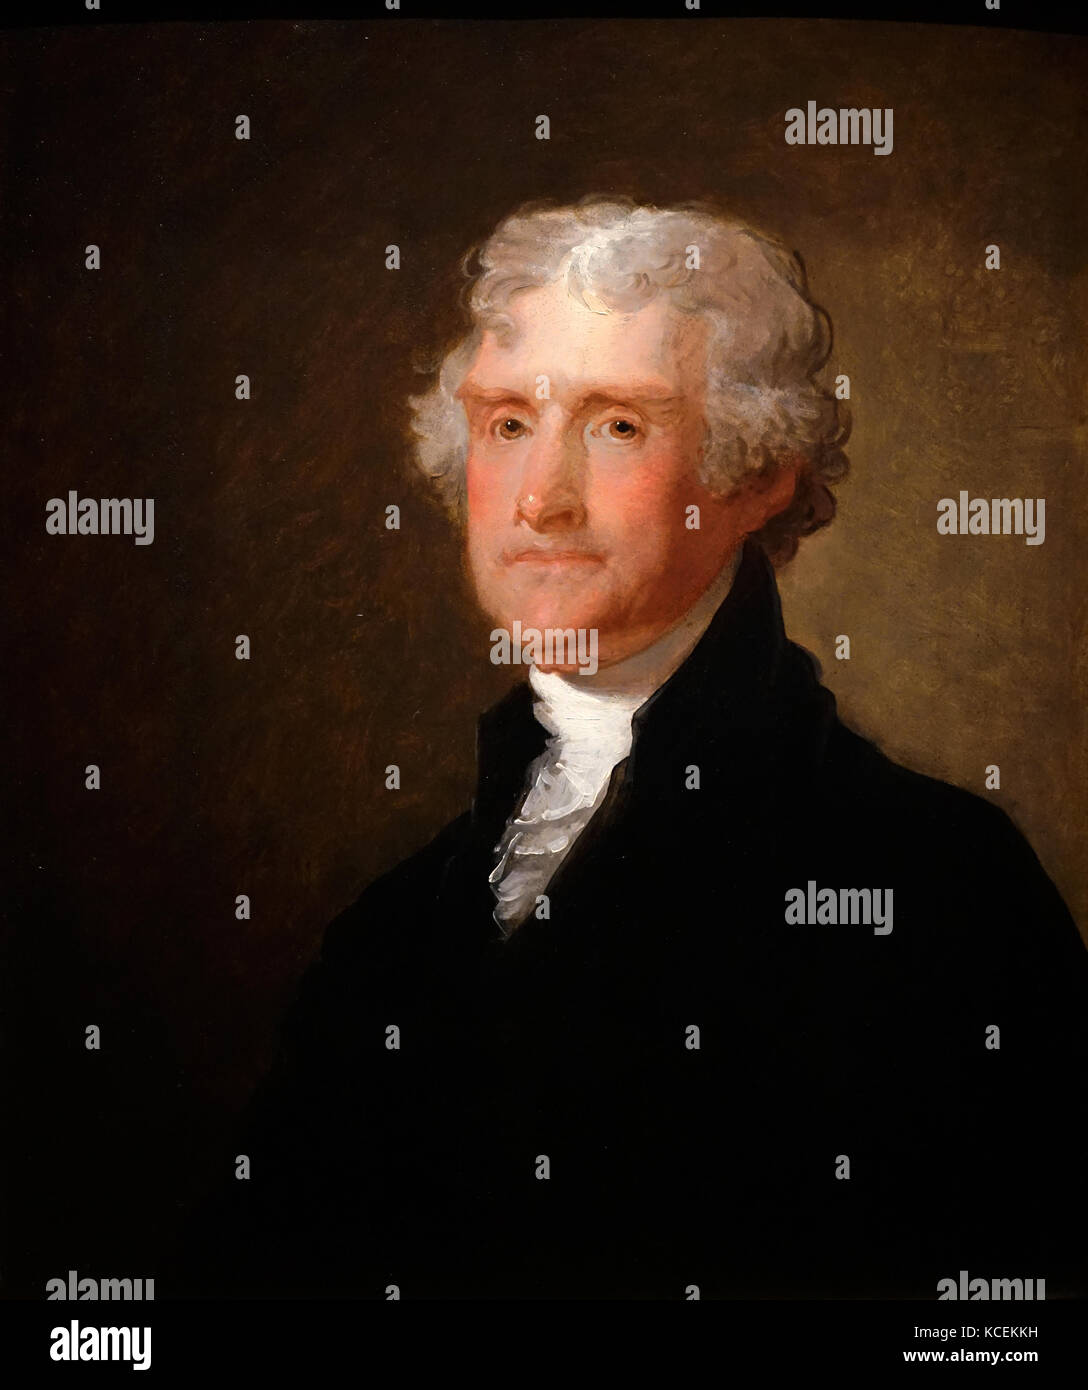 Portrait of Thomas Jefferson (1743-1826) an American Founding Father, President of the United States and author of the Declaration of Independence. Painted by Gilbert Stuart (1755-1828) an American painter. Dated 19th Century Stock Photo